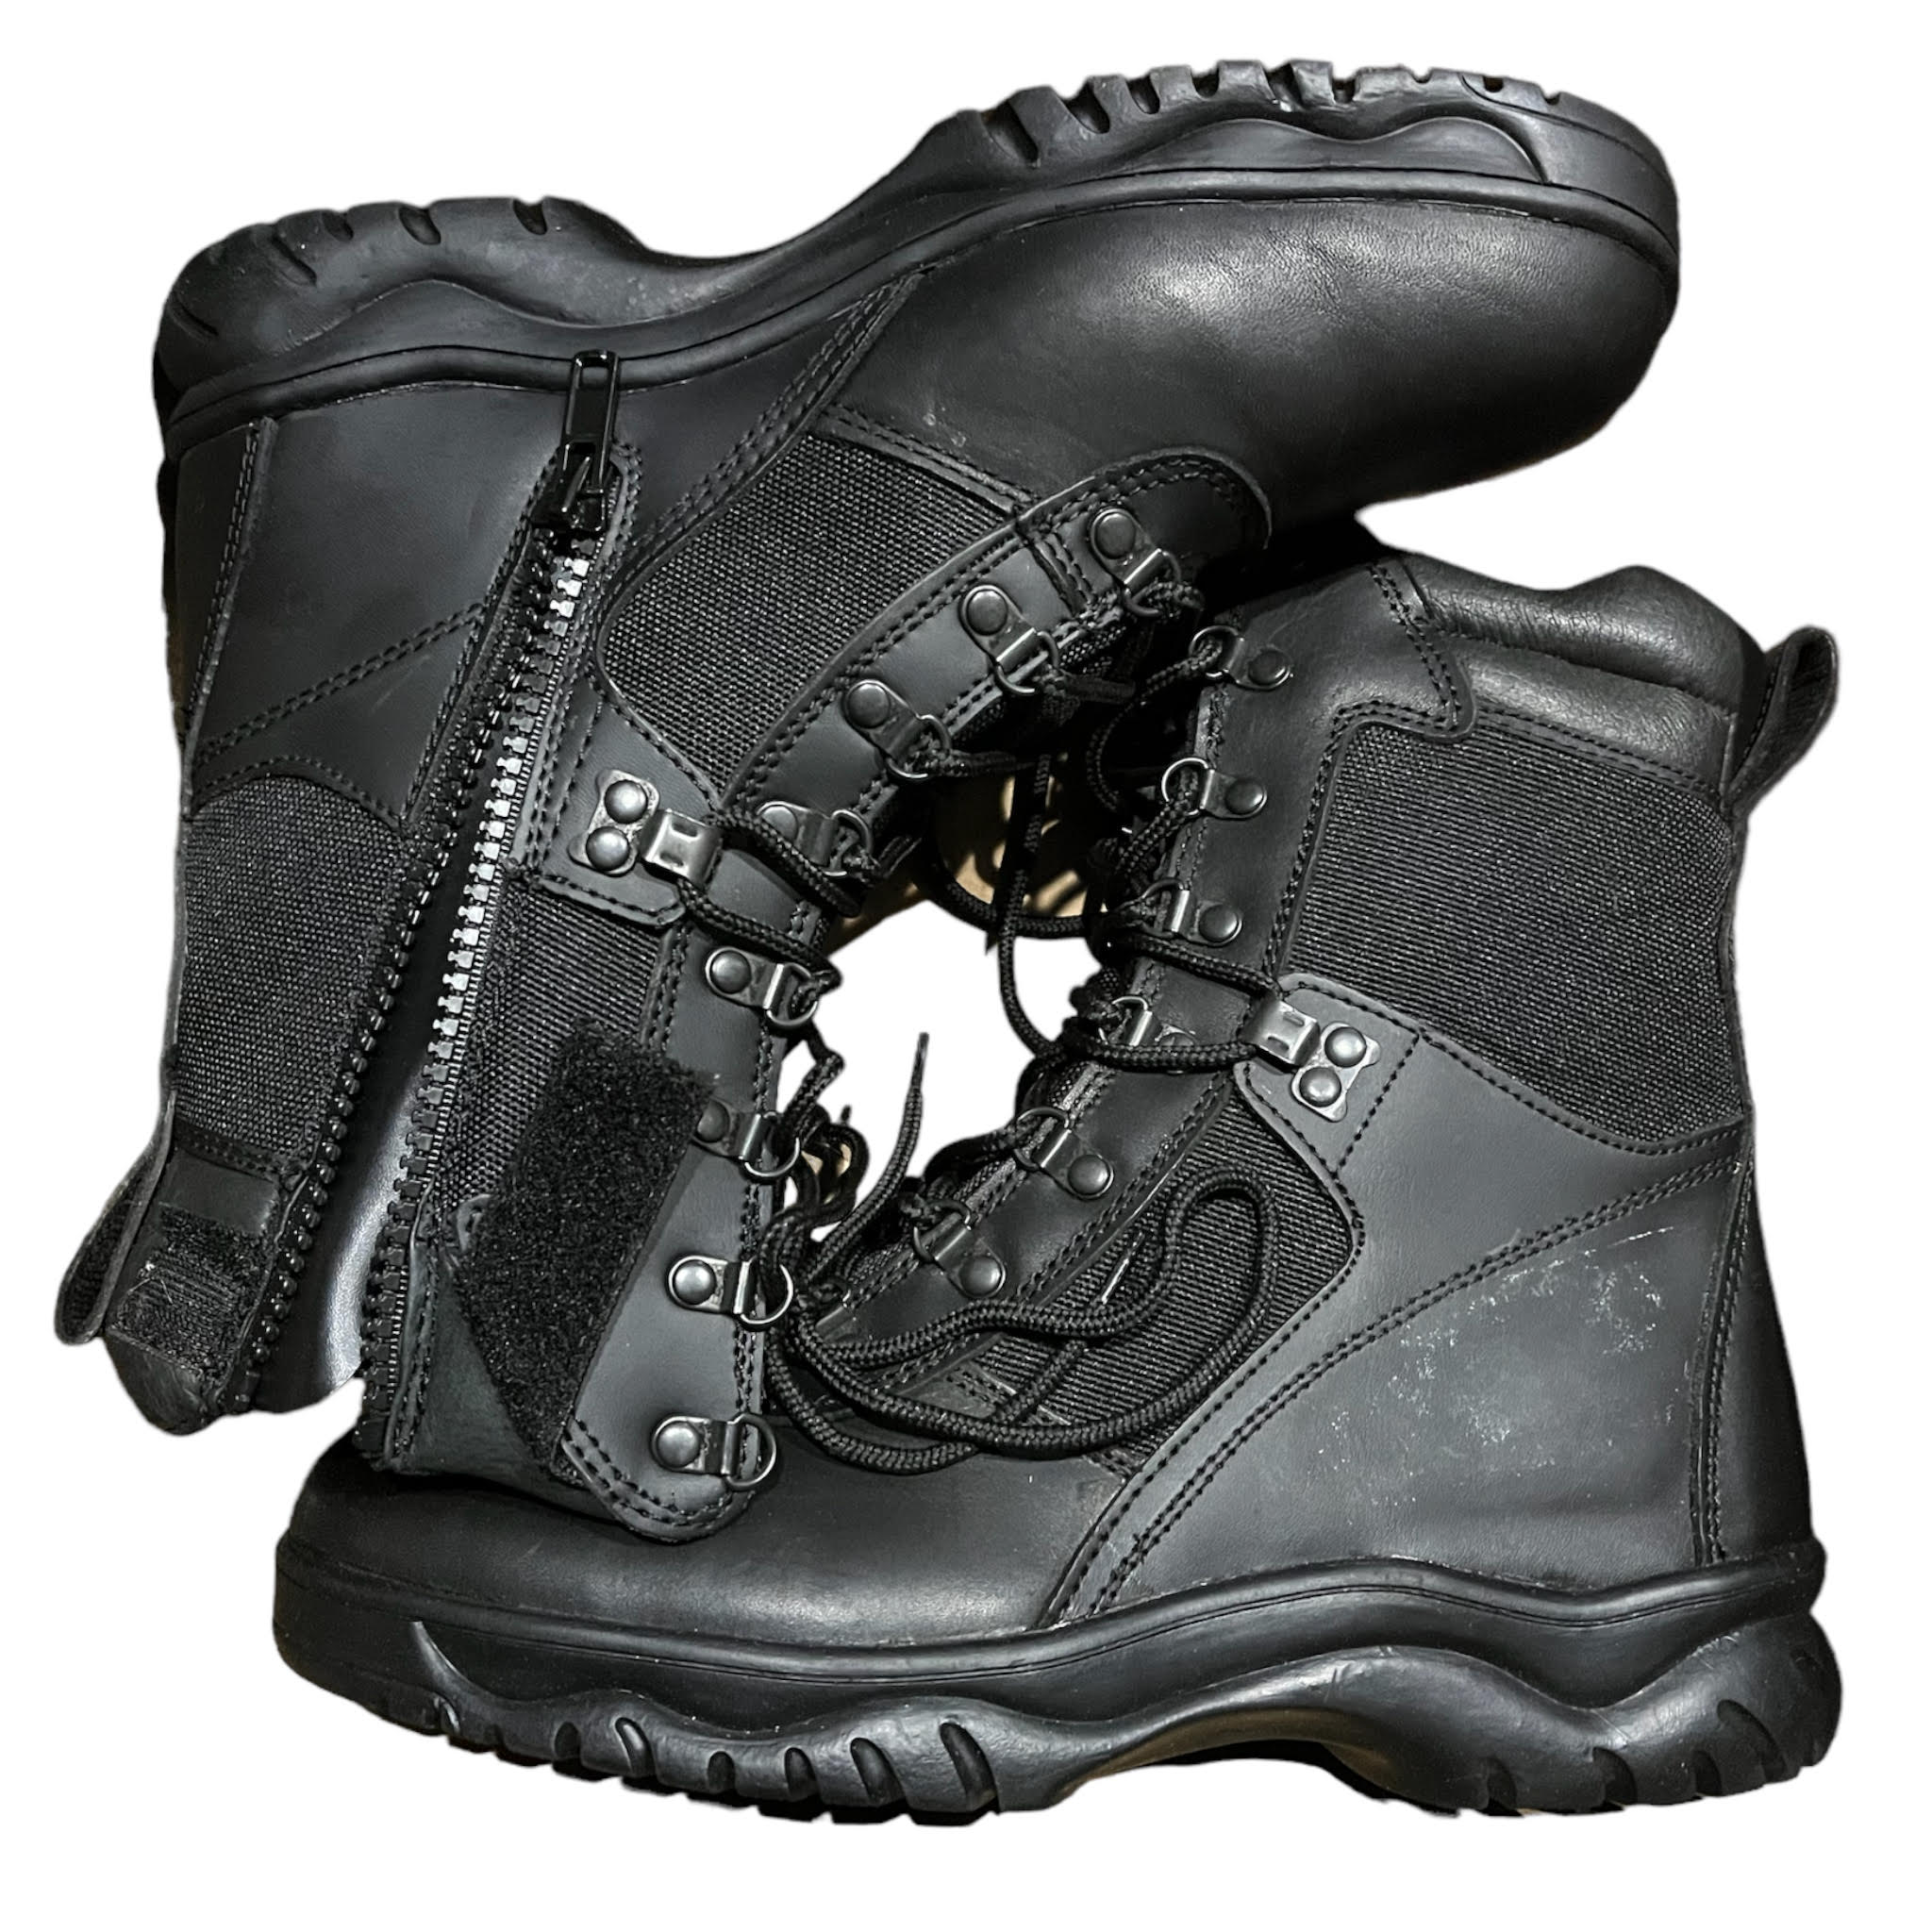 (USED) Rothco Forced Entry Tactical Boot with Side Zipper & Composite Toe - 8 Inch